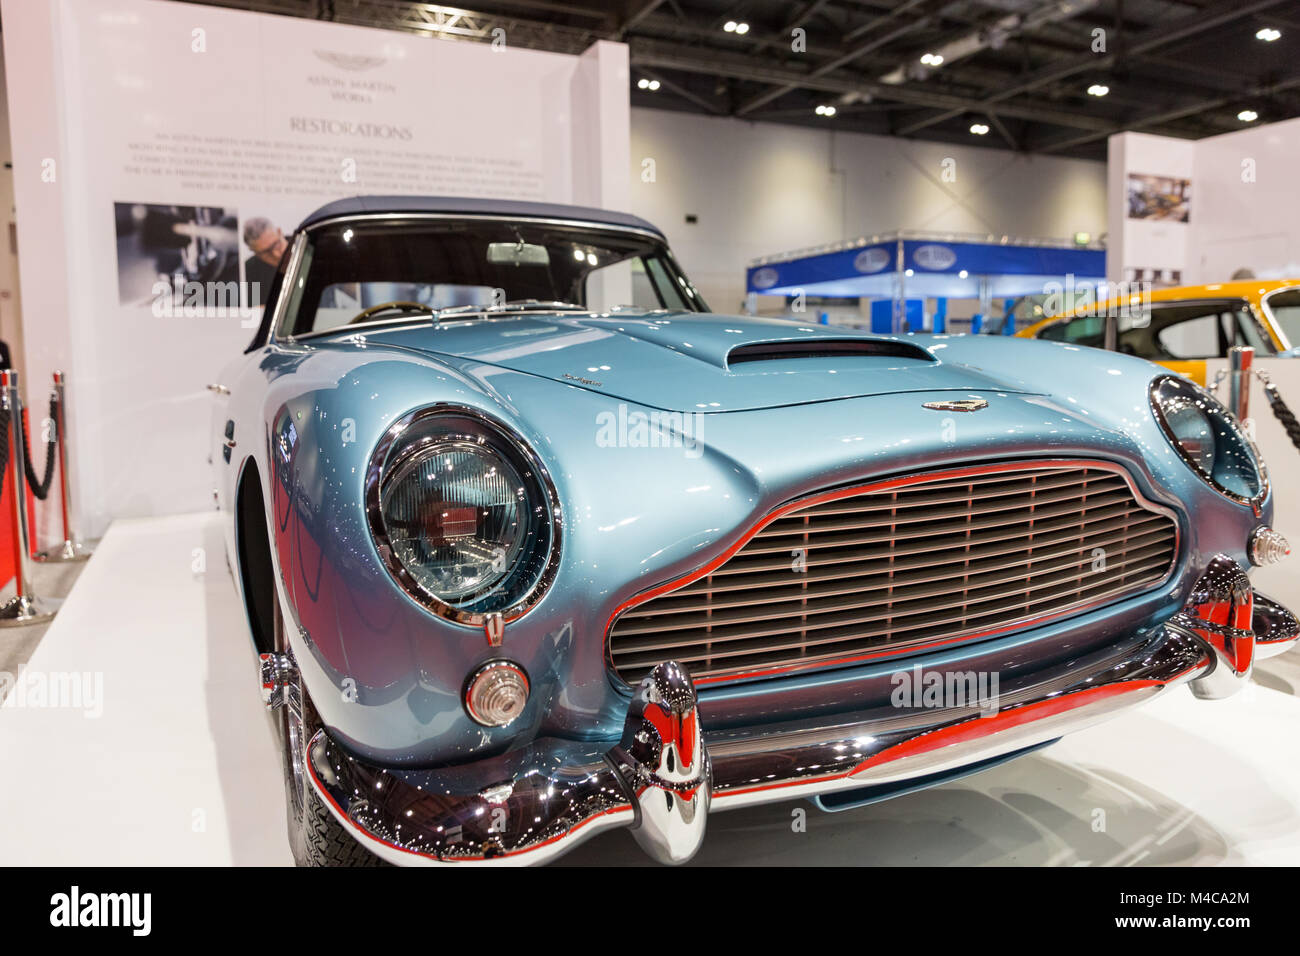 ExCel, London, 15th Feb 2018. An Aston Martin DB5 Convertible at the show.The London Classic Car Show opens to celebrate the world's greatest classic cars, starring 700 of the finest cars, as well as Grand Avenue featuring cars parading down its track. Credit: Imageplotter News and Sports/Alamy Live News Stock Photo